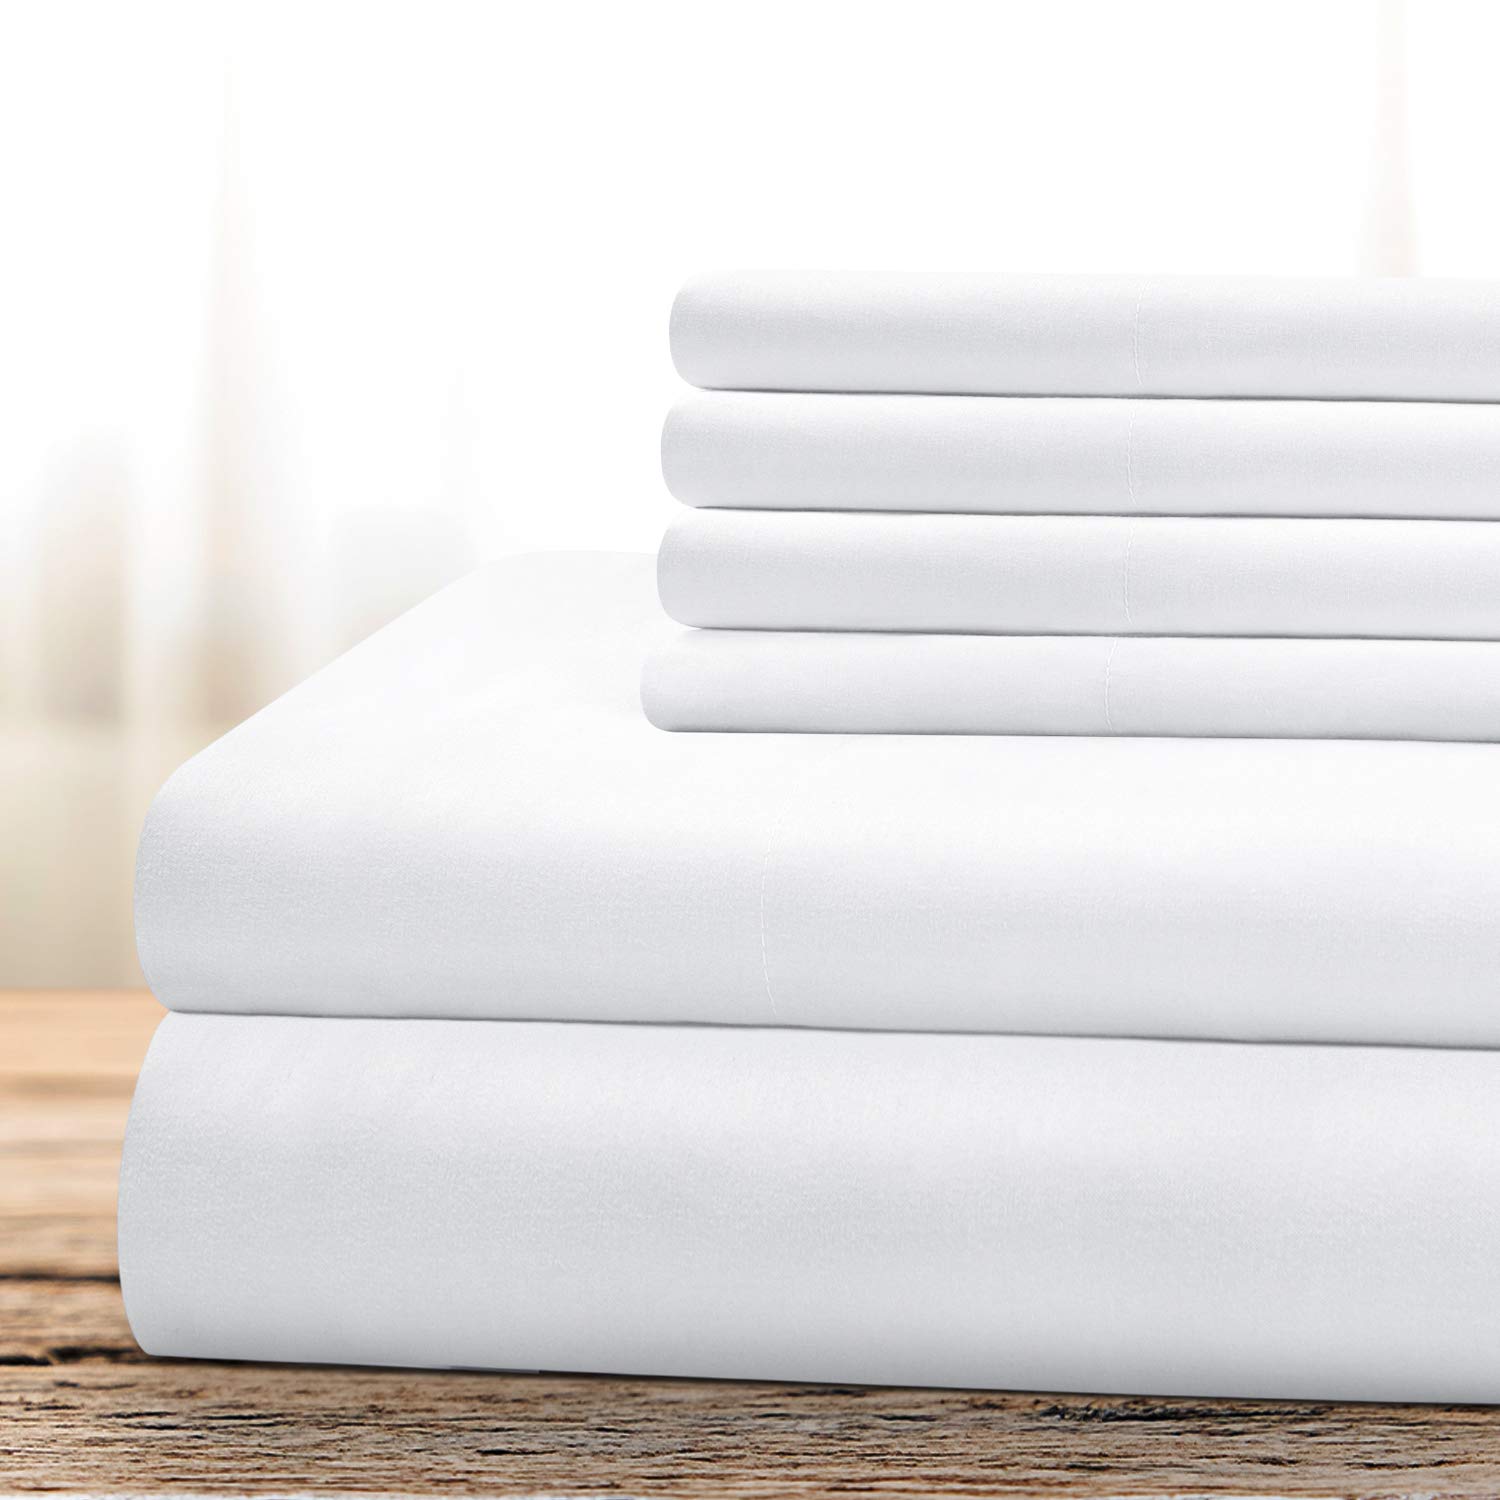 Book Cover BYSURE Hotel Luxury Bed Sheets Set 6 Piece(California King, White) - Super Soft 1800 Thread Count 100% Microfiber Sheets with Deep Pockets, Wrinkle & Fade Resistant California King White